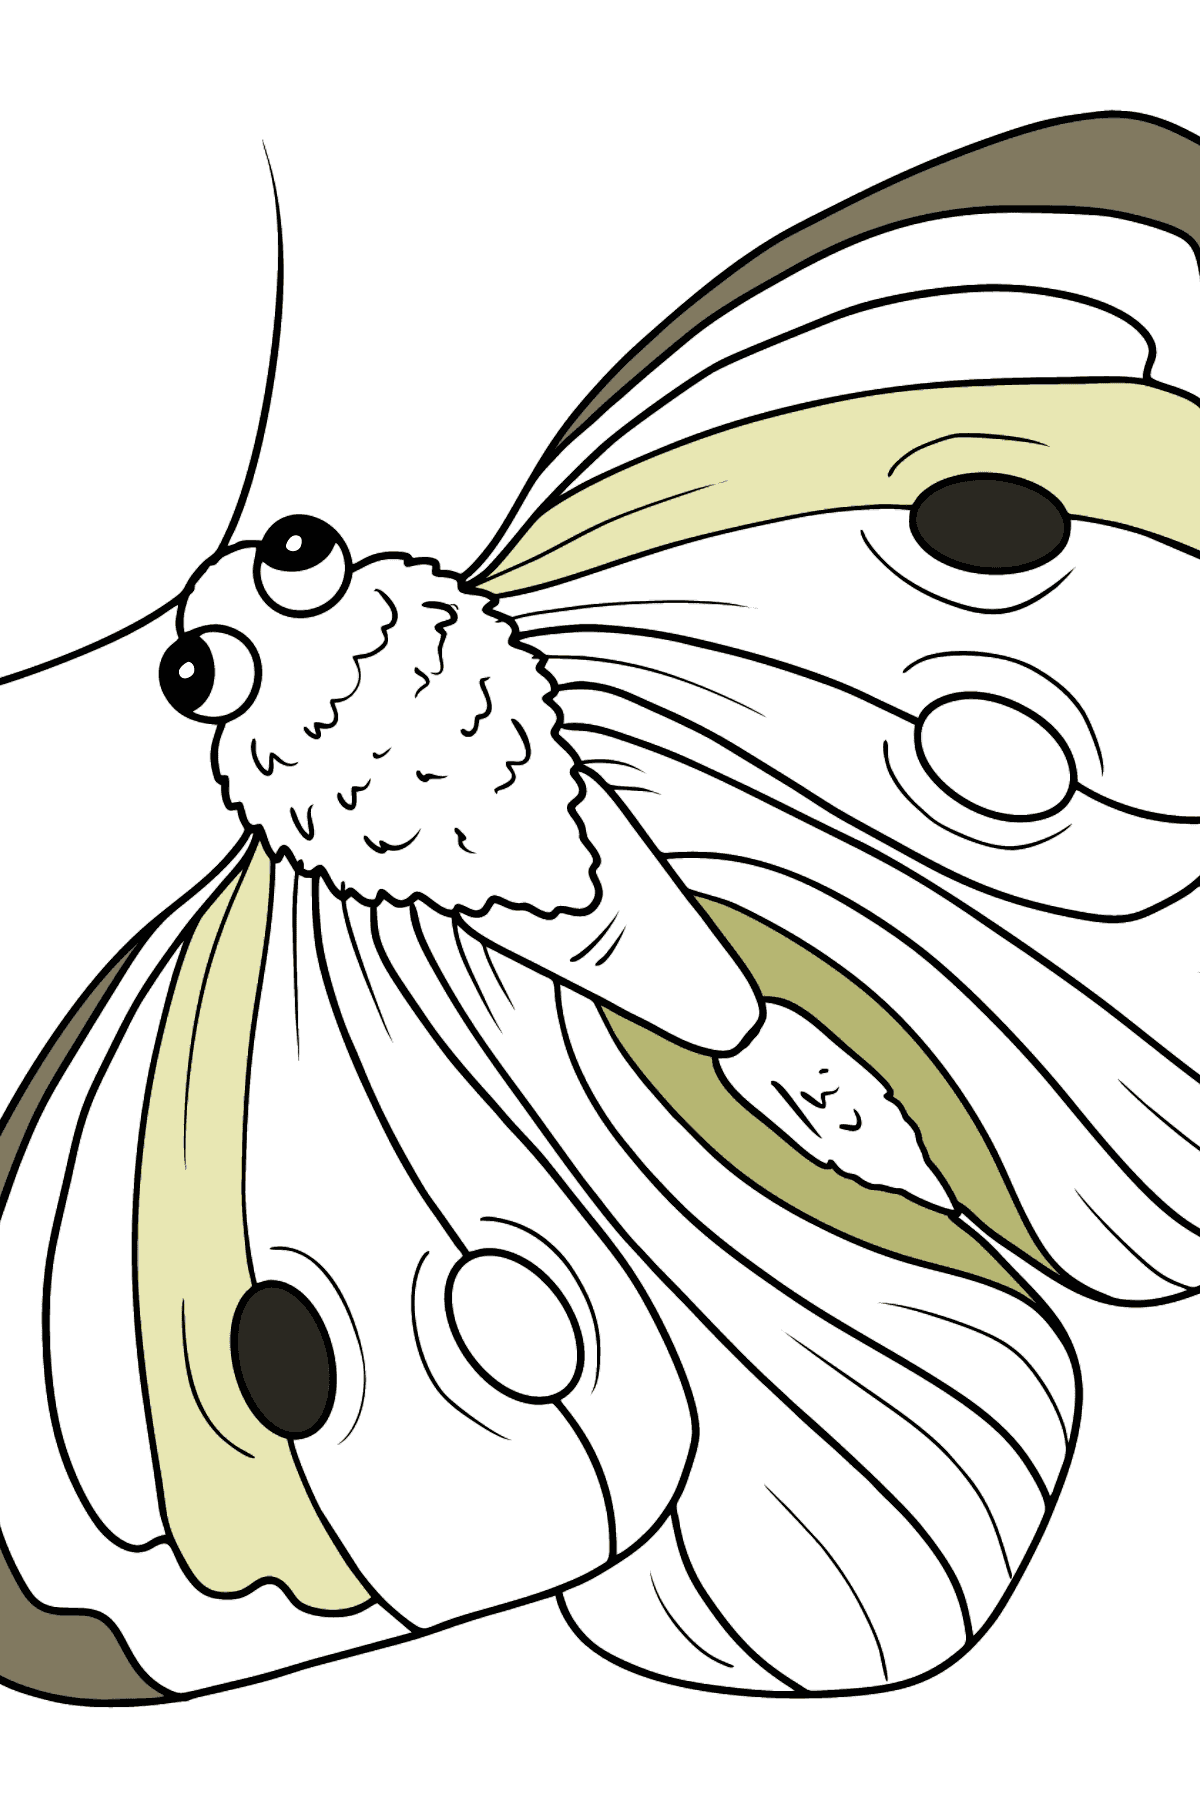 Pieris Butterfly coloring page - Coloring Pages for Kids